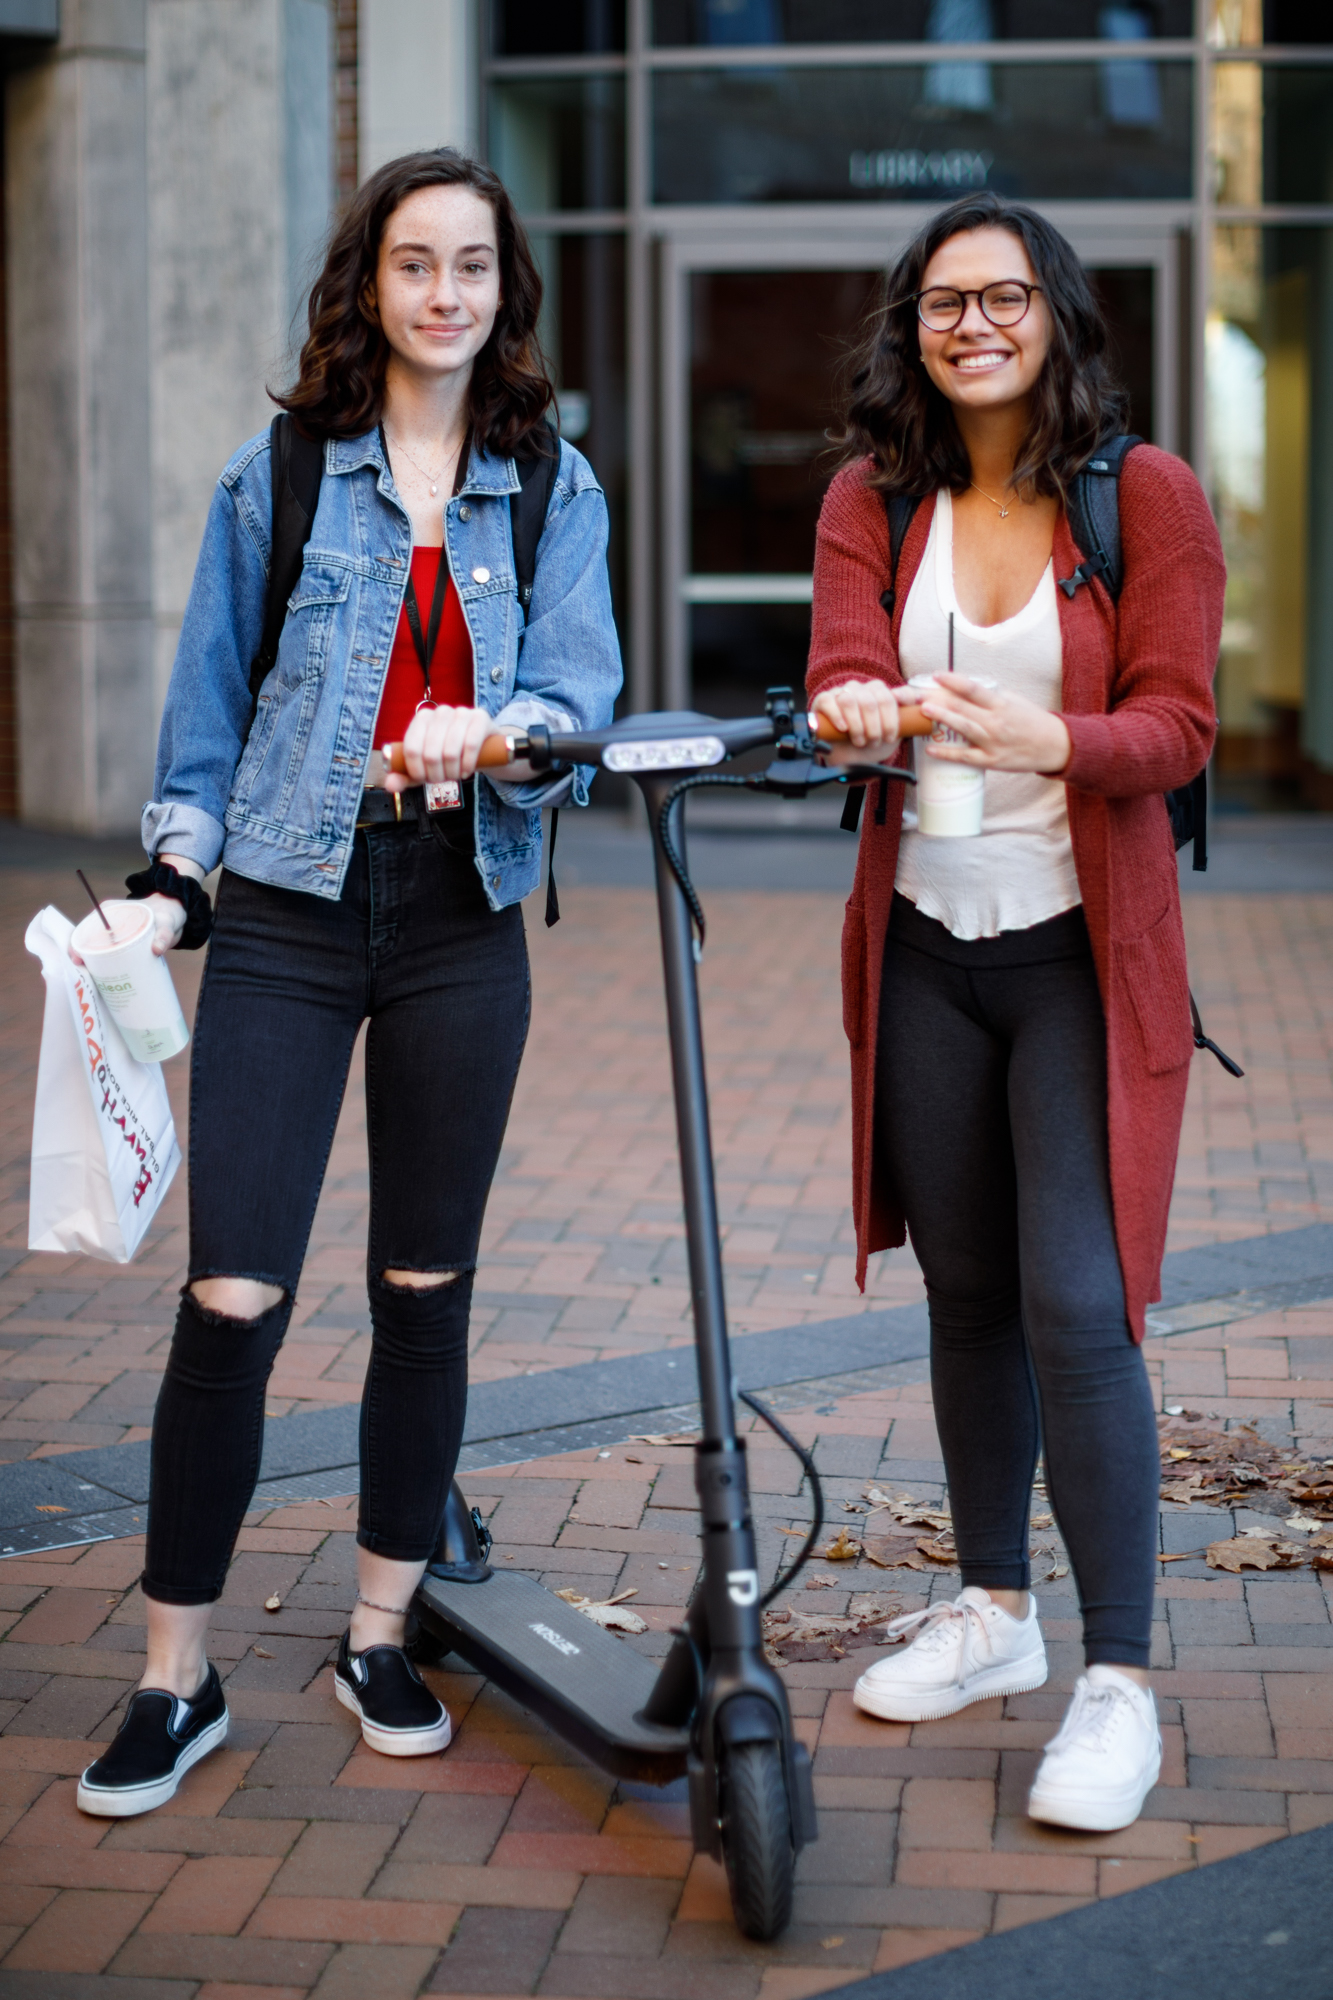 Anya Hyra, left and Kyra Asher, right holding an electric scooter between them.